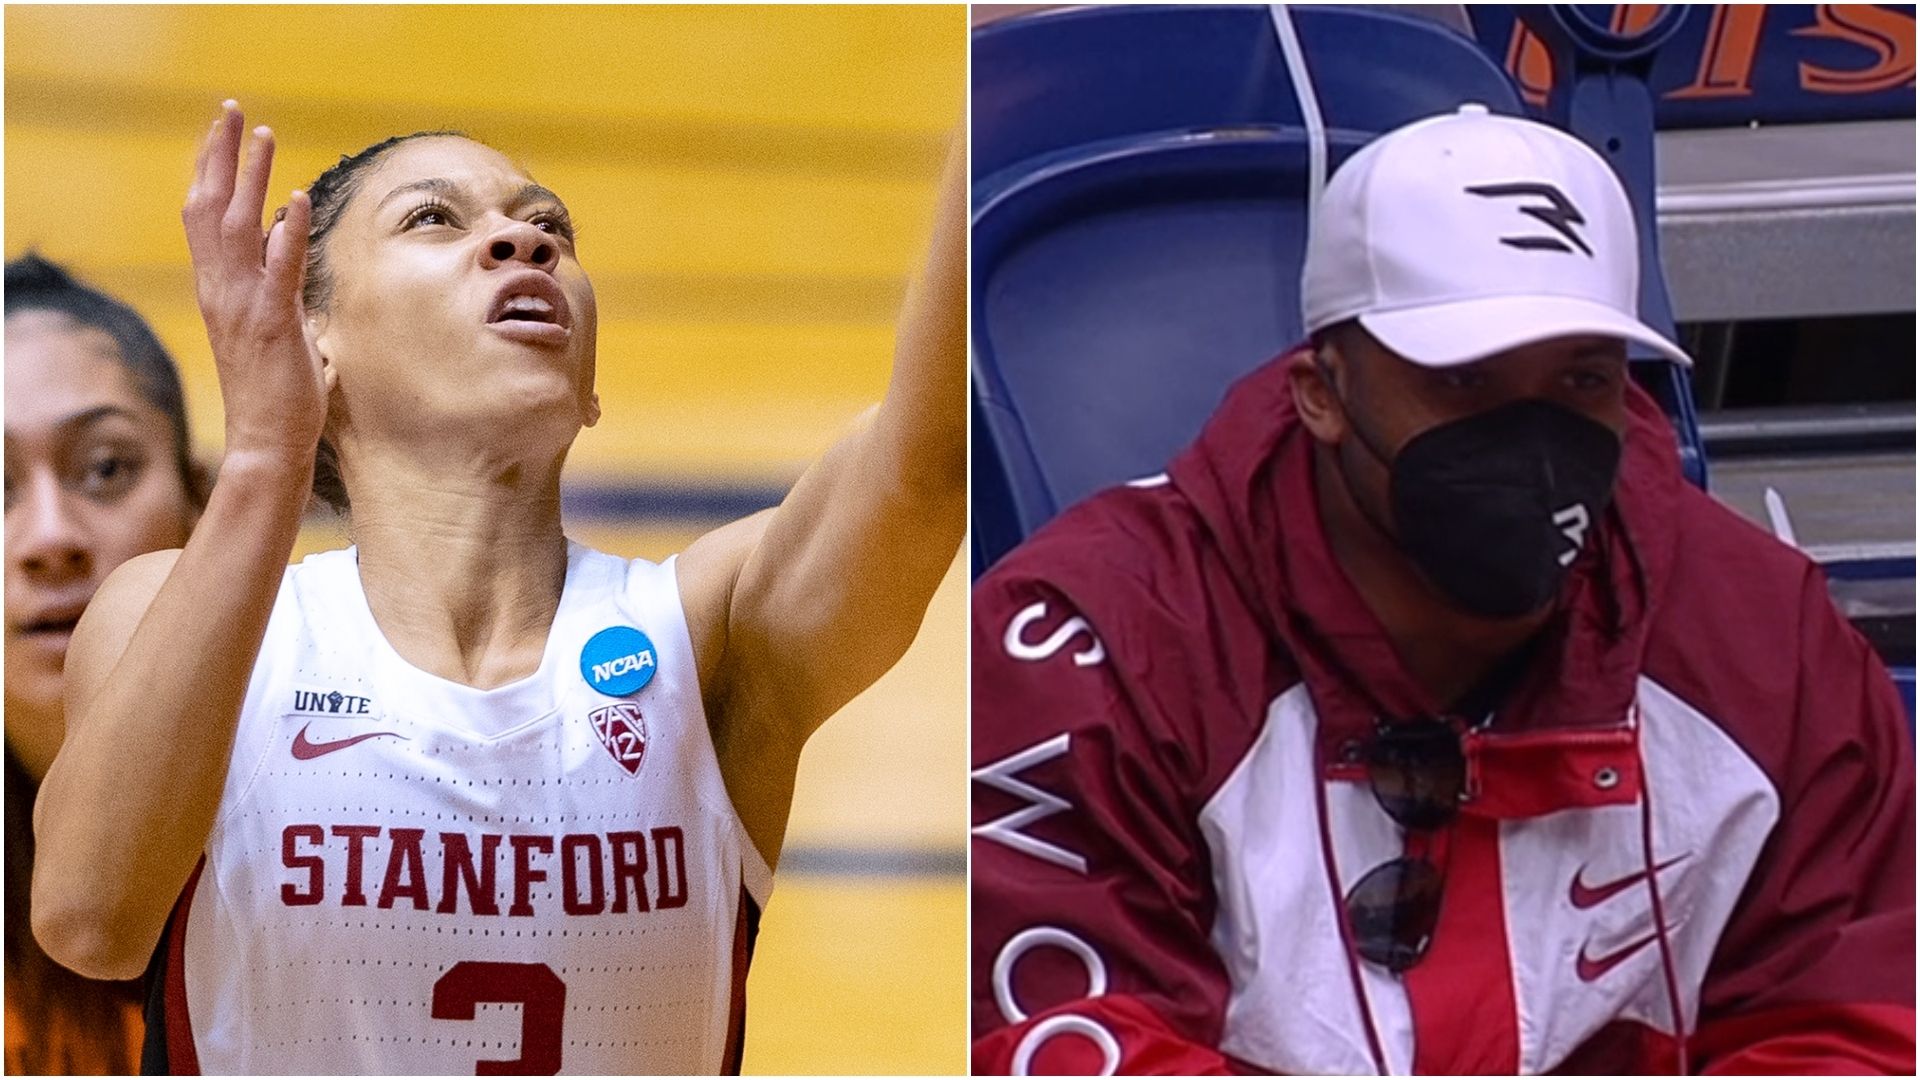 Stanford's Anna Wilson, buoyed by brother Russell's support, steps into  national spotlight